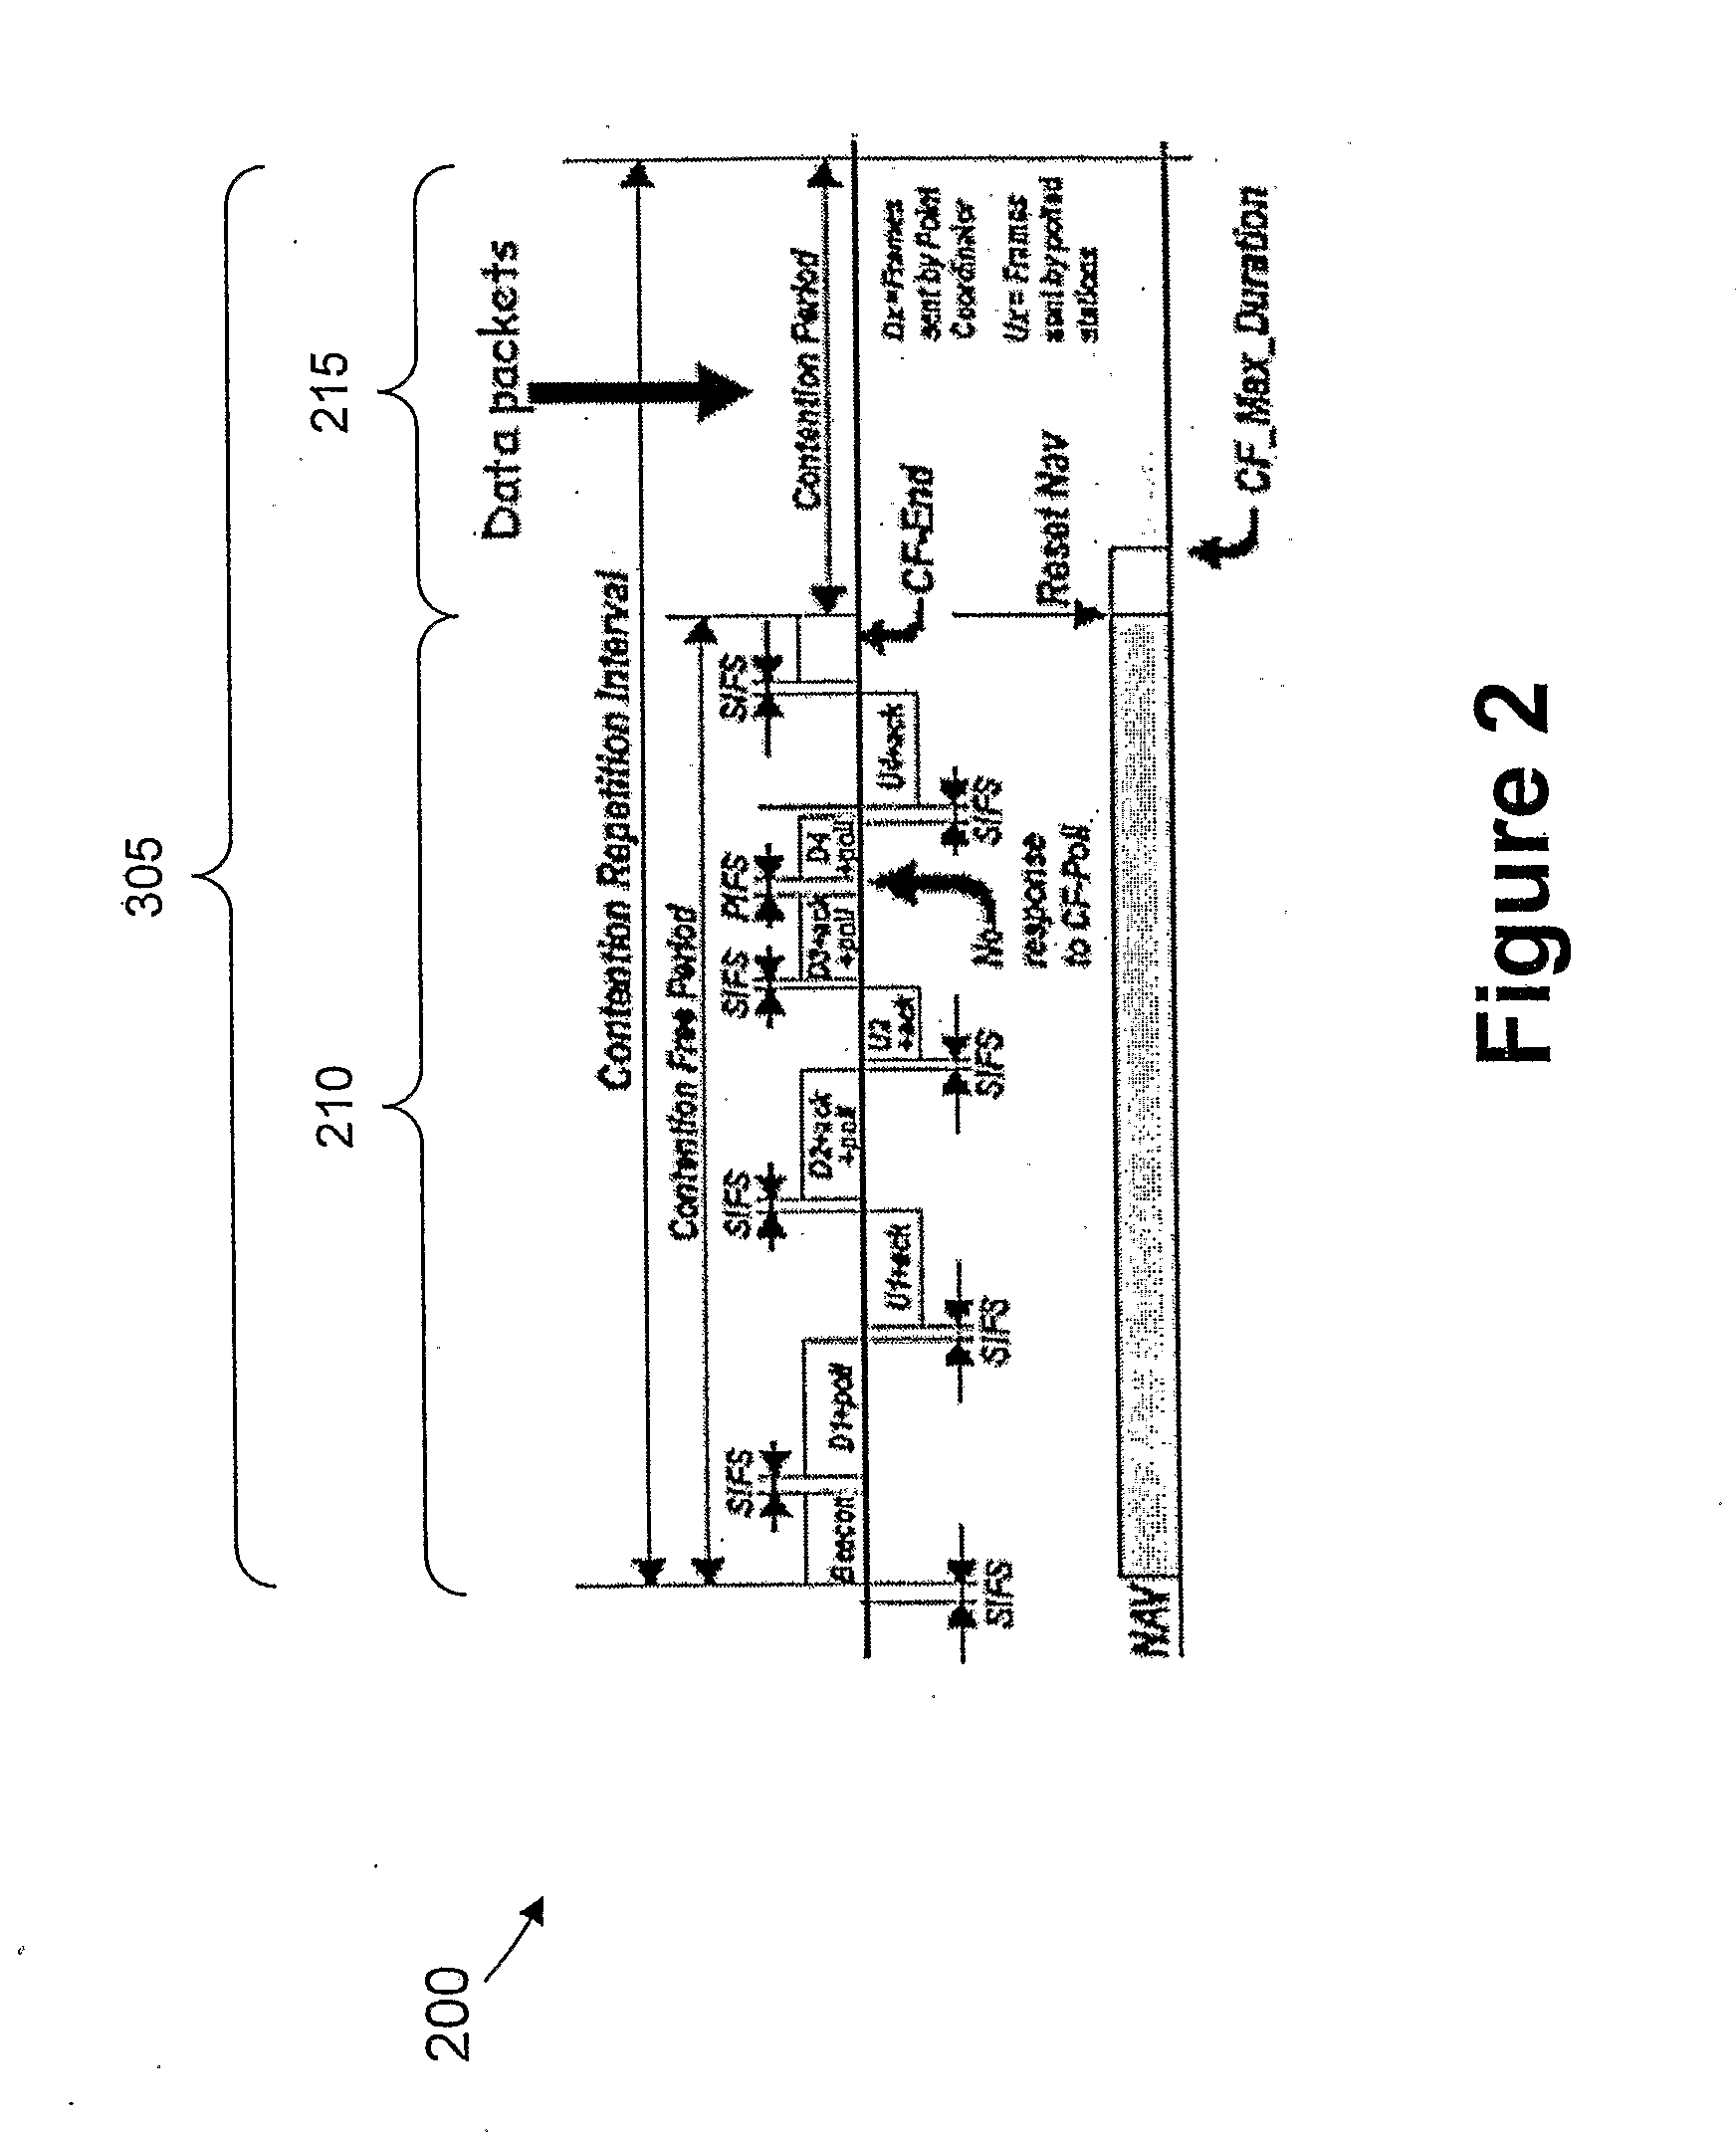 Method And Apparatus For Providing Quality Of Service To Voip Over 802.11 Wireless Lans